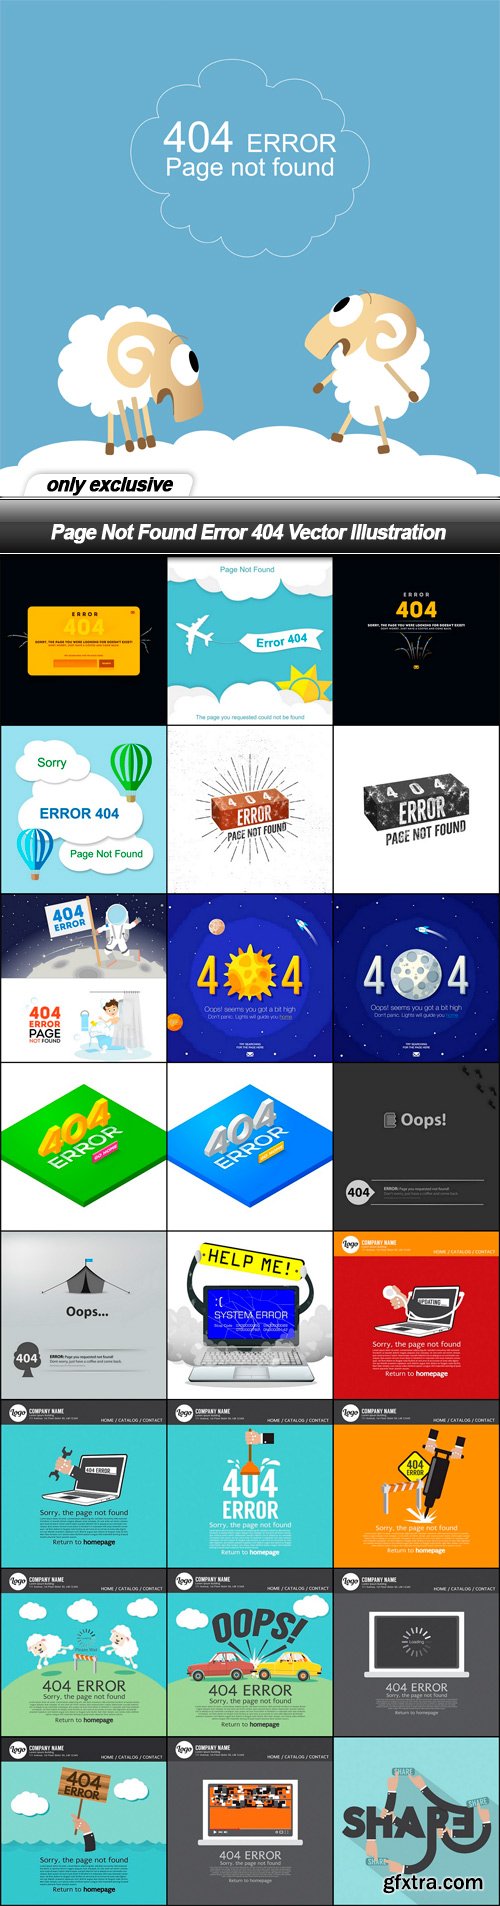 Page Not Found Error 404 Vector Illustration - 25 EPS